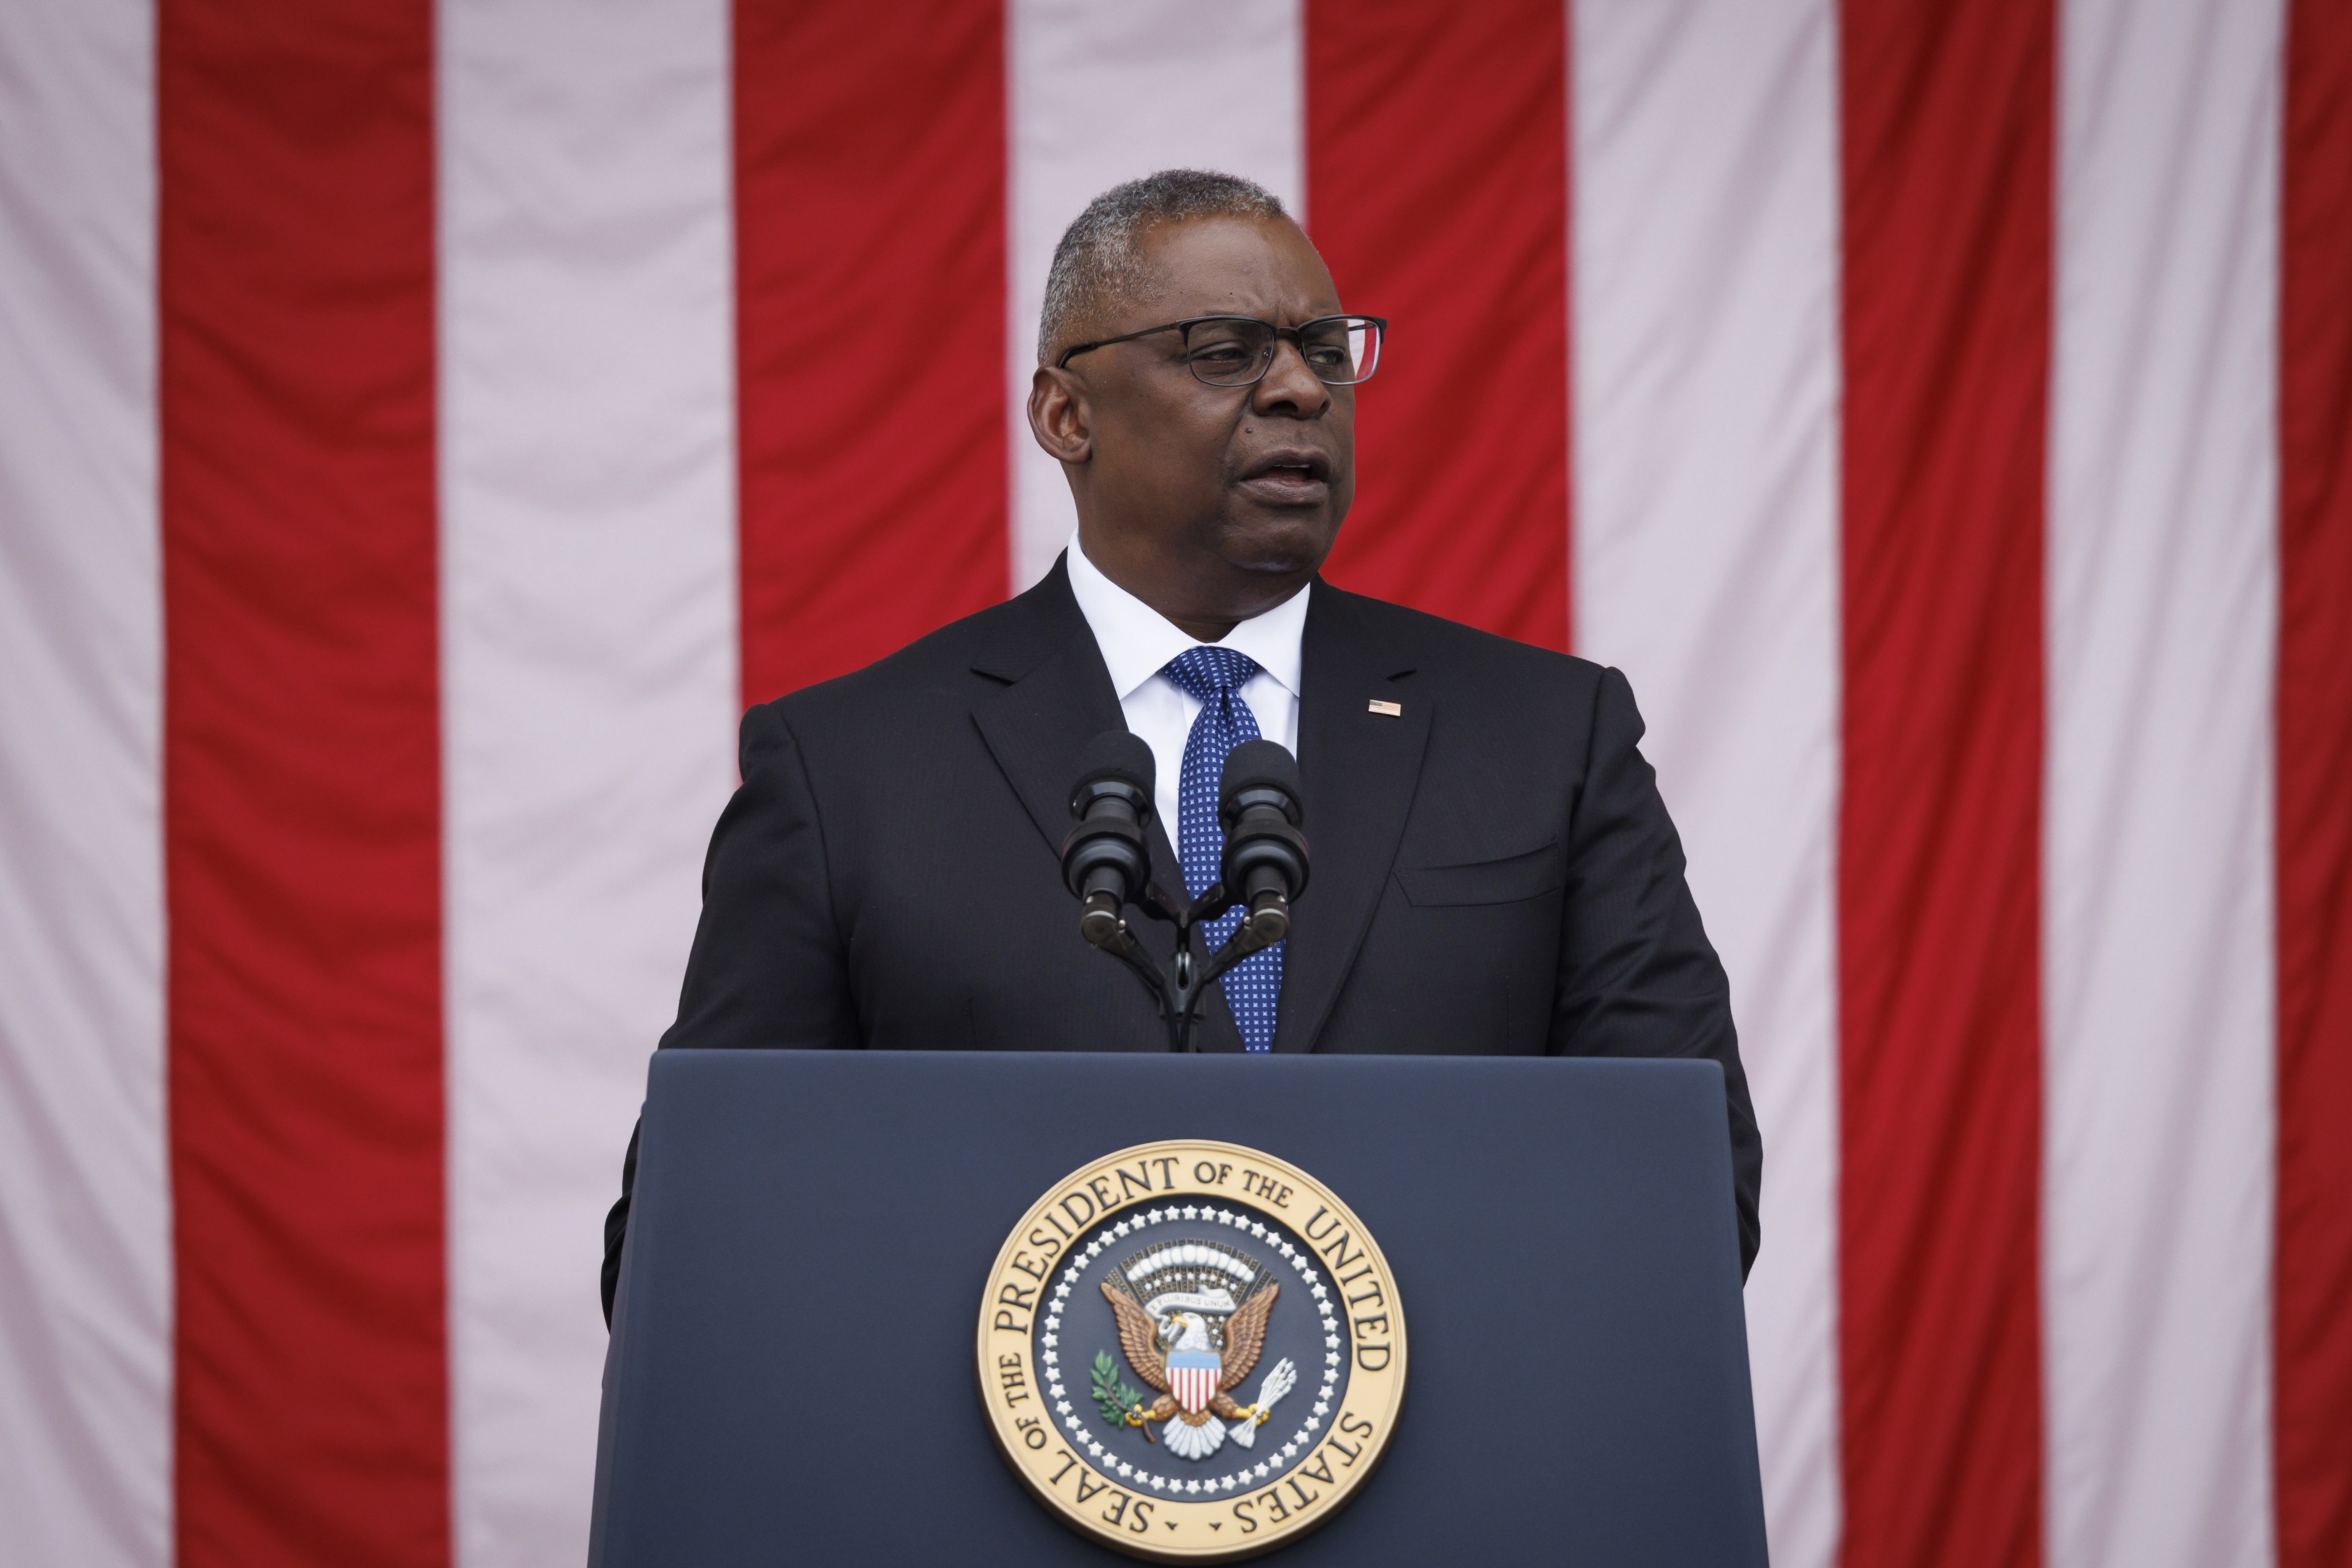 US Secretary of Defence Lloyd Austin speaks during a Memorial Day address at Arlington National Cemetery in Virginia on Monday. Photo: EPA-EFE